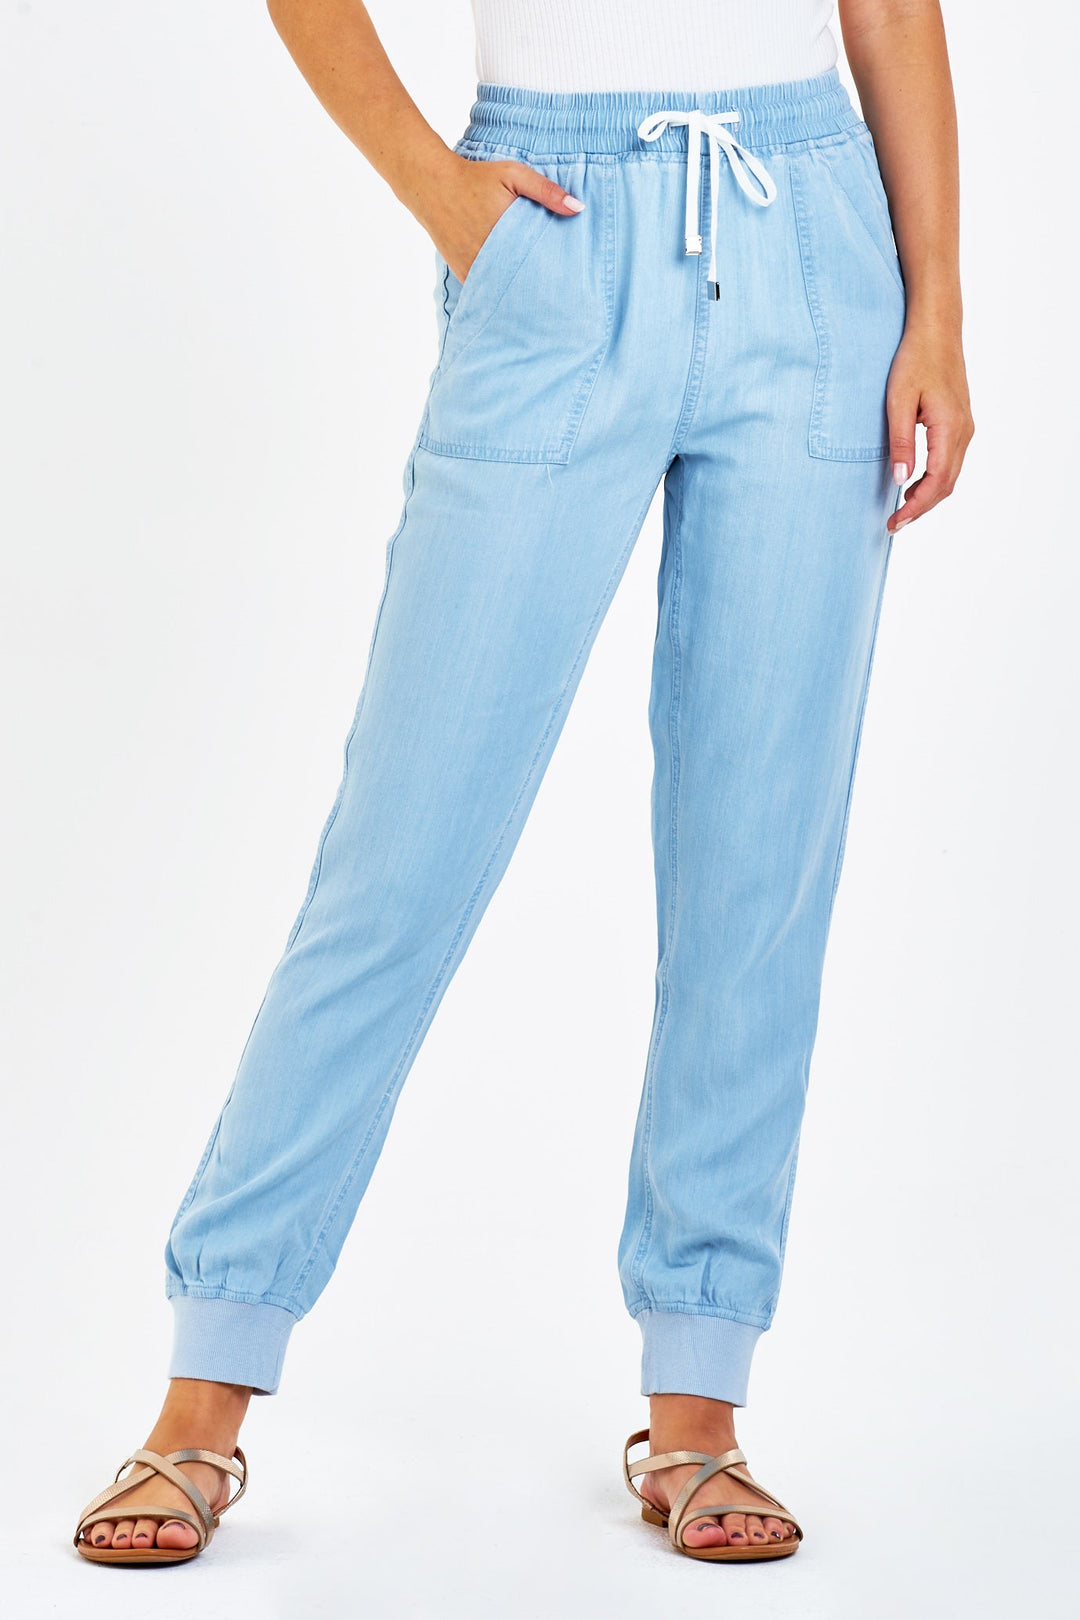 image of a female model wearing a JACEY SUPER HIGH RISE CROPPED JOGGER PANTS PERFECT BLUE DEAR JOHN DENIM 